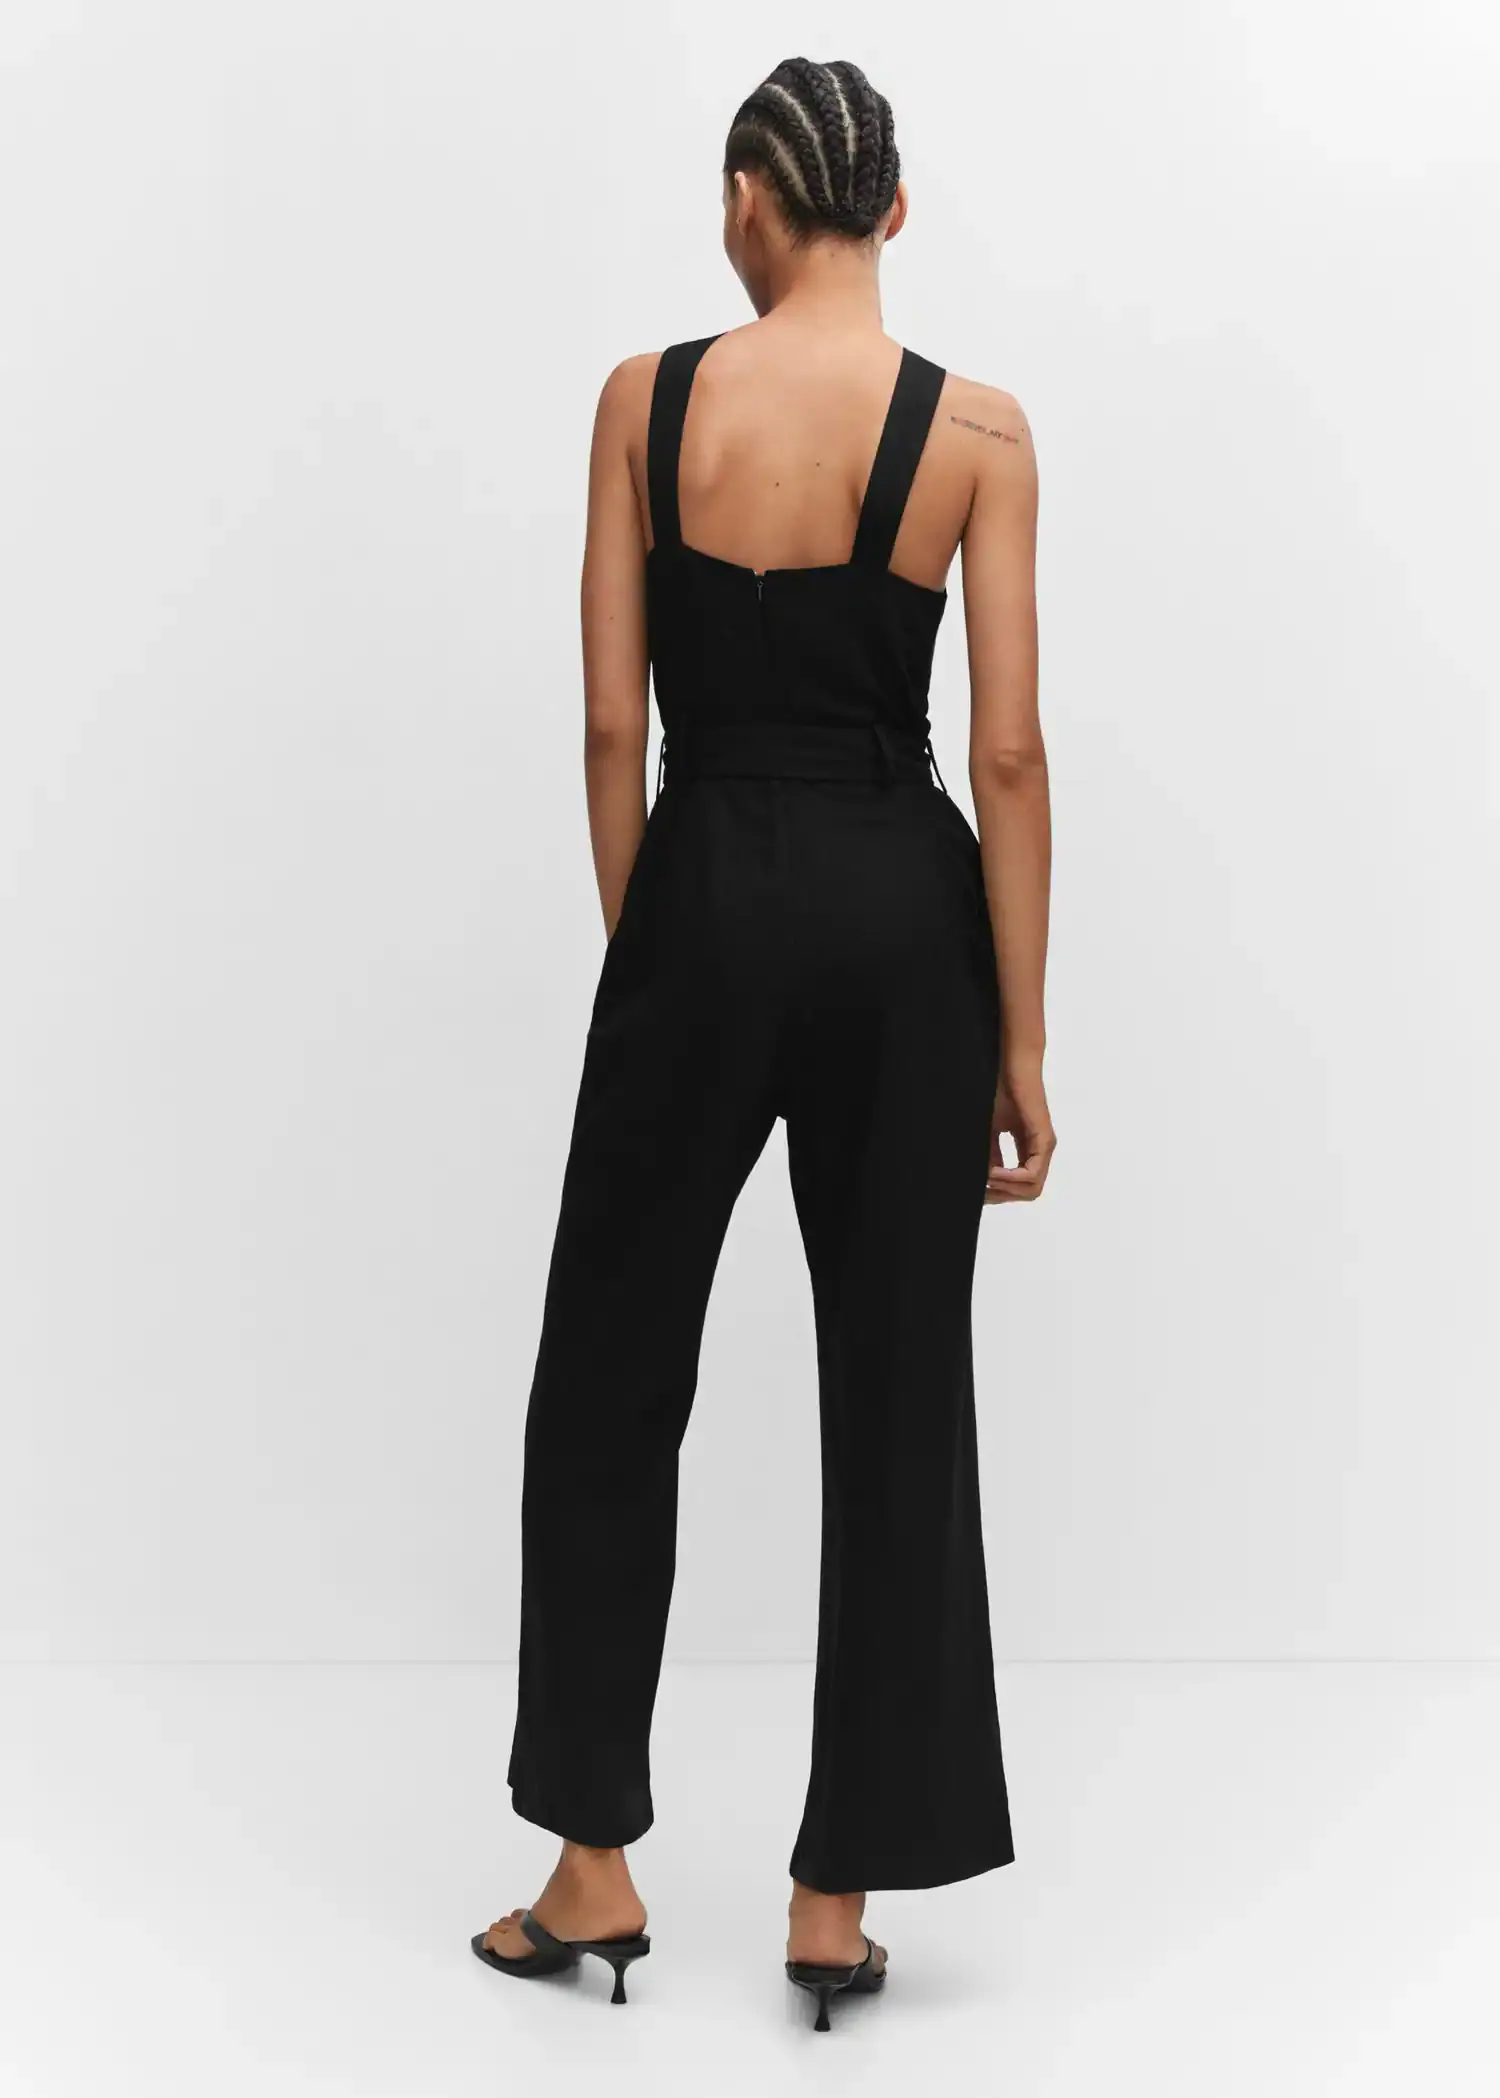 Mango Halter-neck jumpsuit with belt. a woman in a black jumpsuit is standing in front of a white wall. 